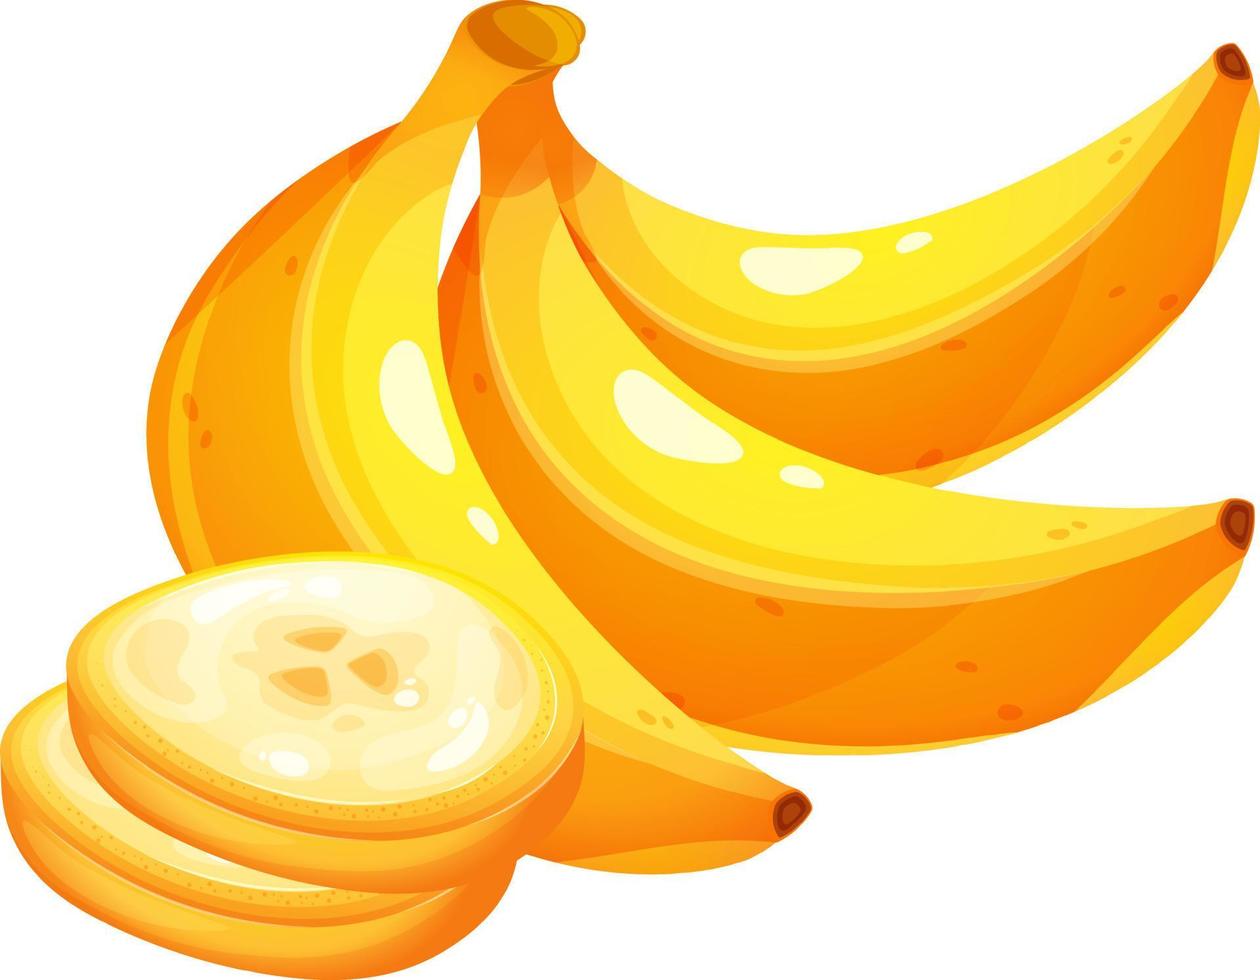 A bunch of whole bananas and piece, slice cartoon on transparent background. Bananas on branch, juicy bananas vector